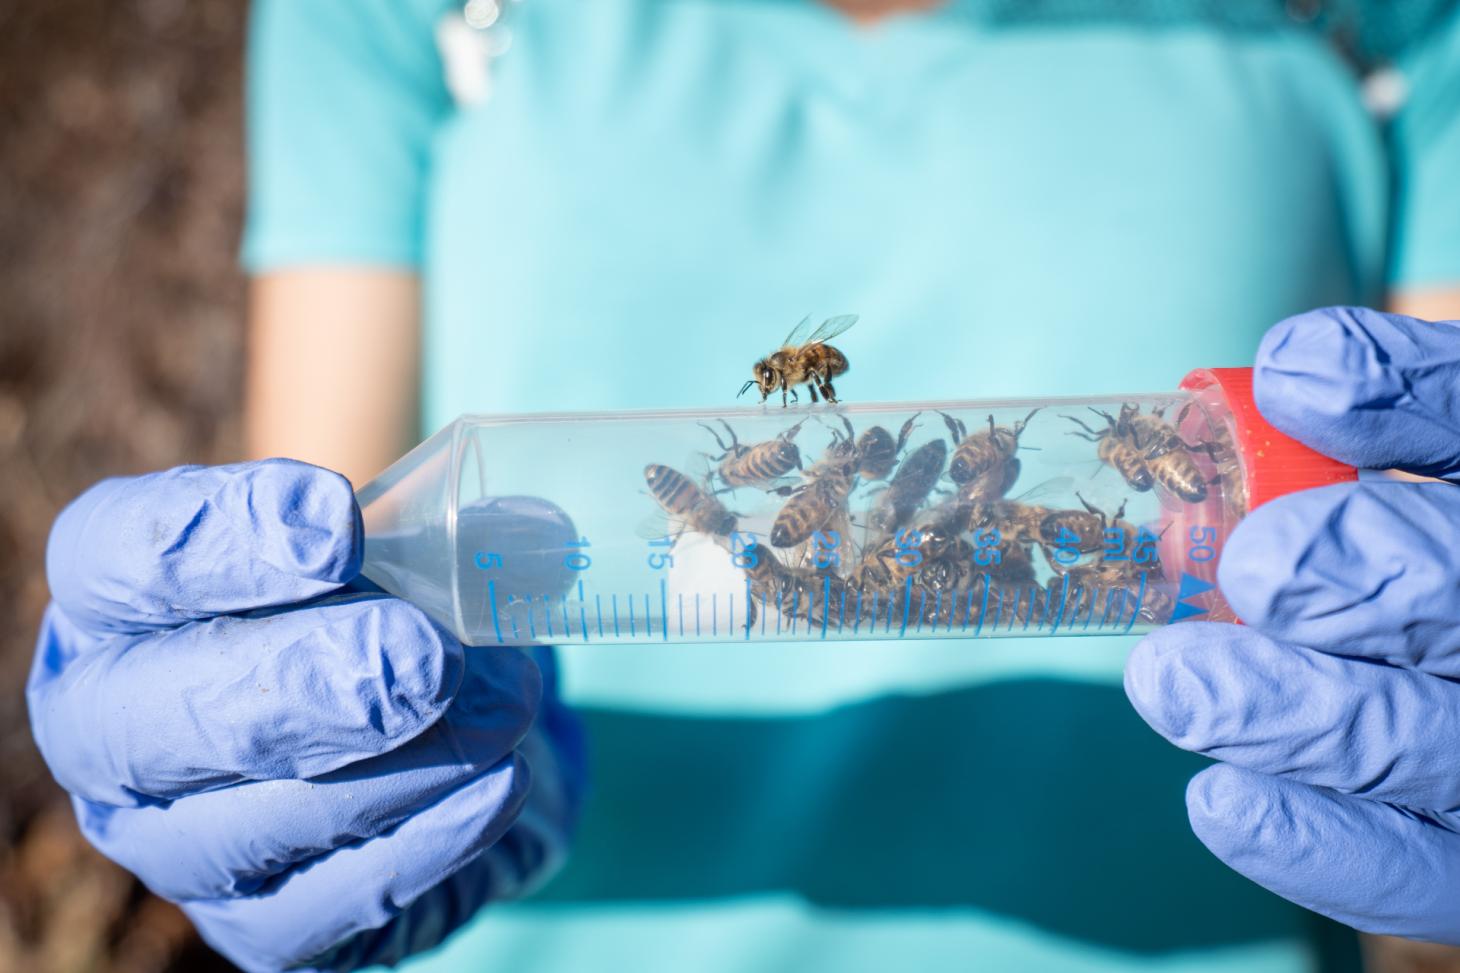 Dr. Alison McAfee holds research bees in tube